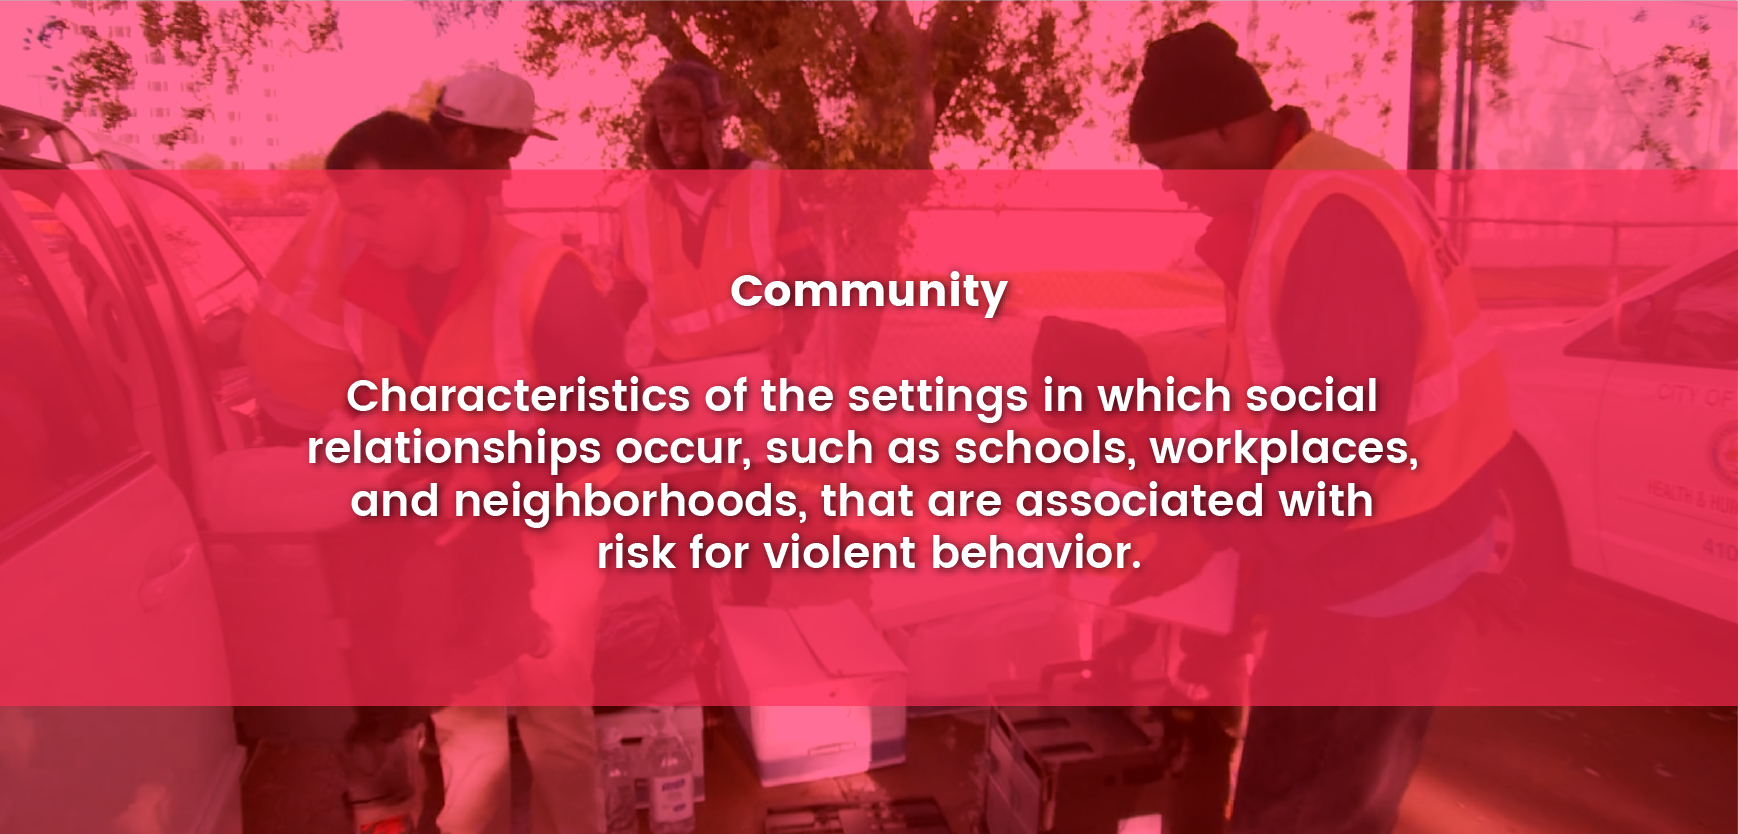 Community - Factors at this level are the settings in which social relationships occur such as schools, workplaces, and neighborhoods, and the characteristics of these settings that are associated with becoming perpetrators of violence or preventing violent acts.